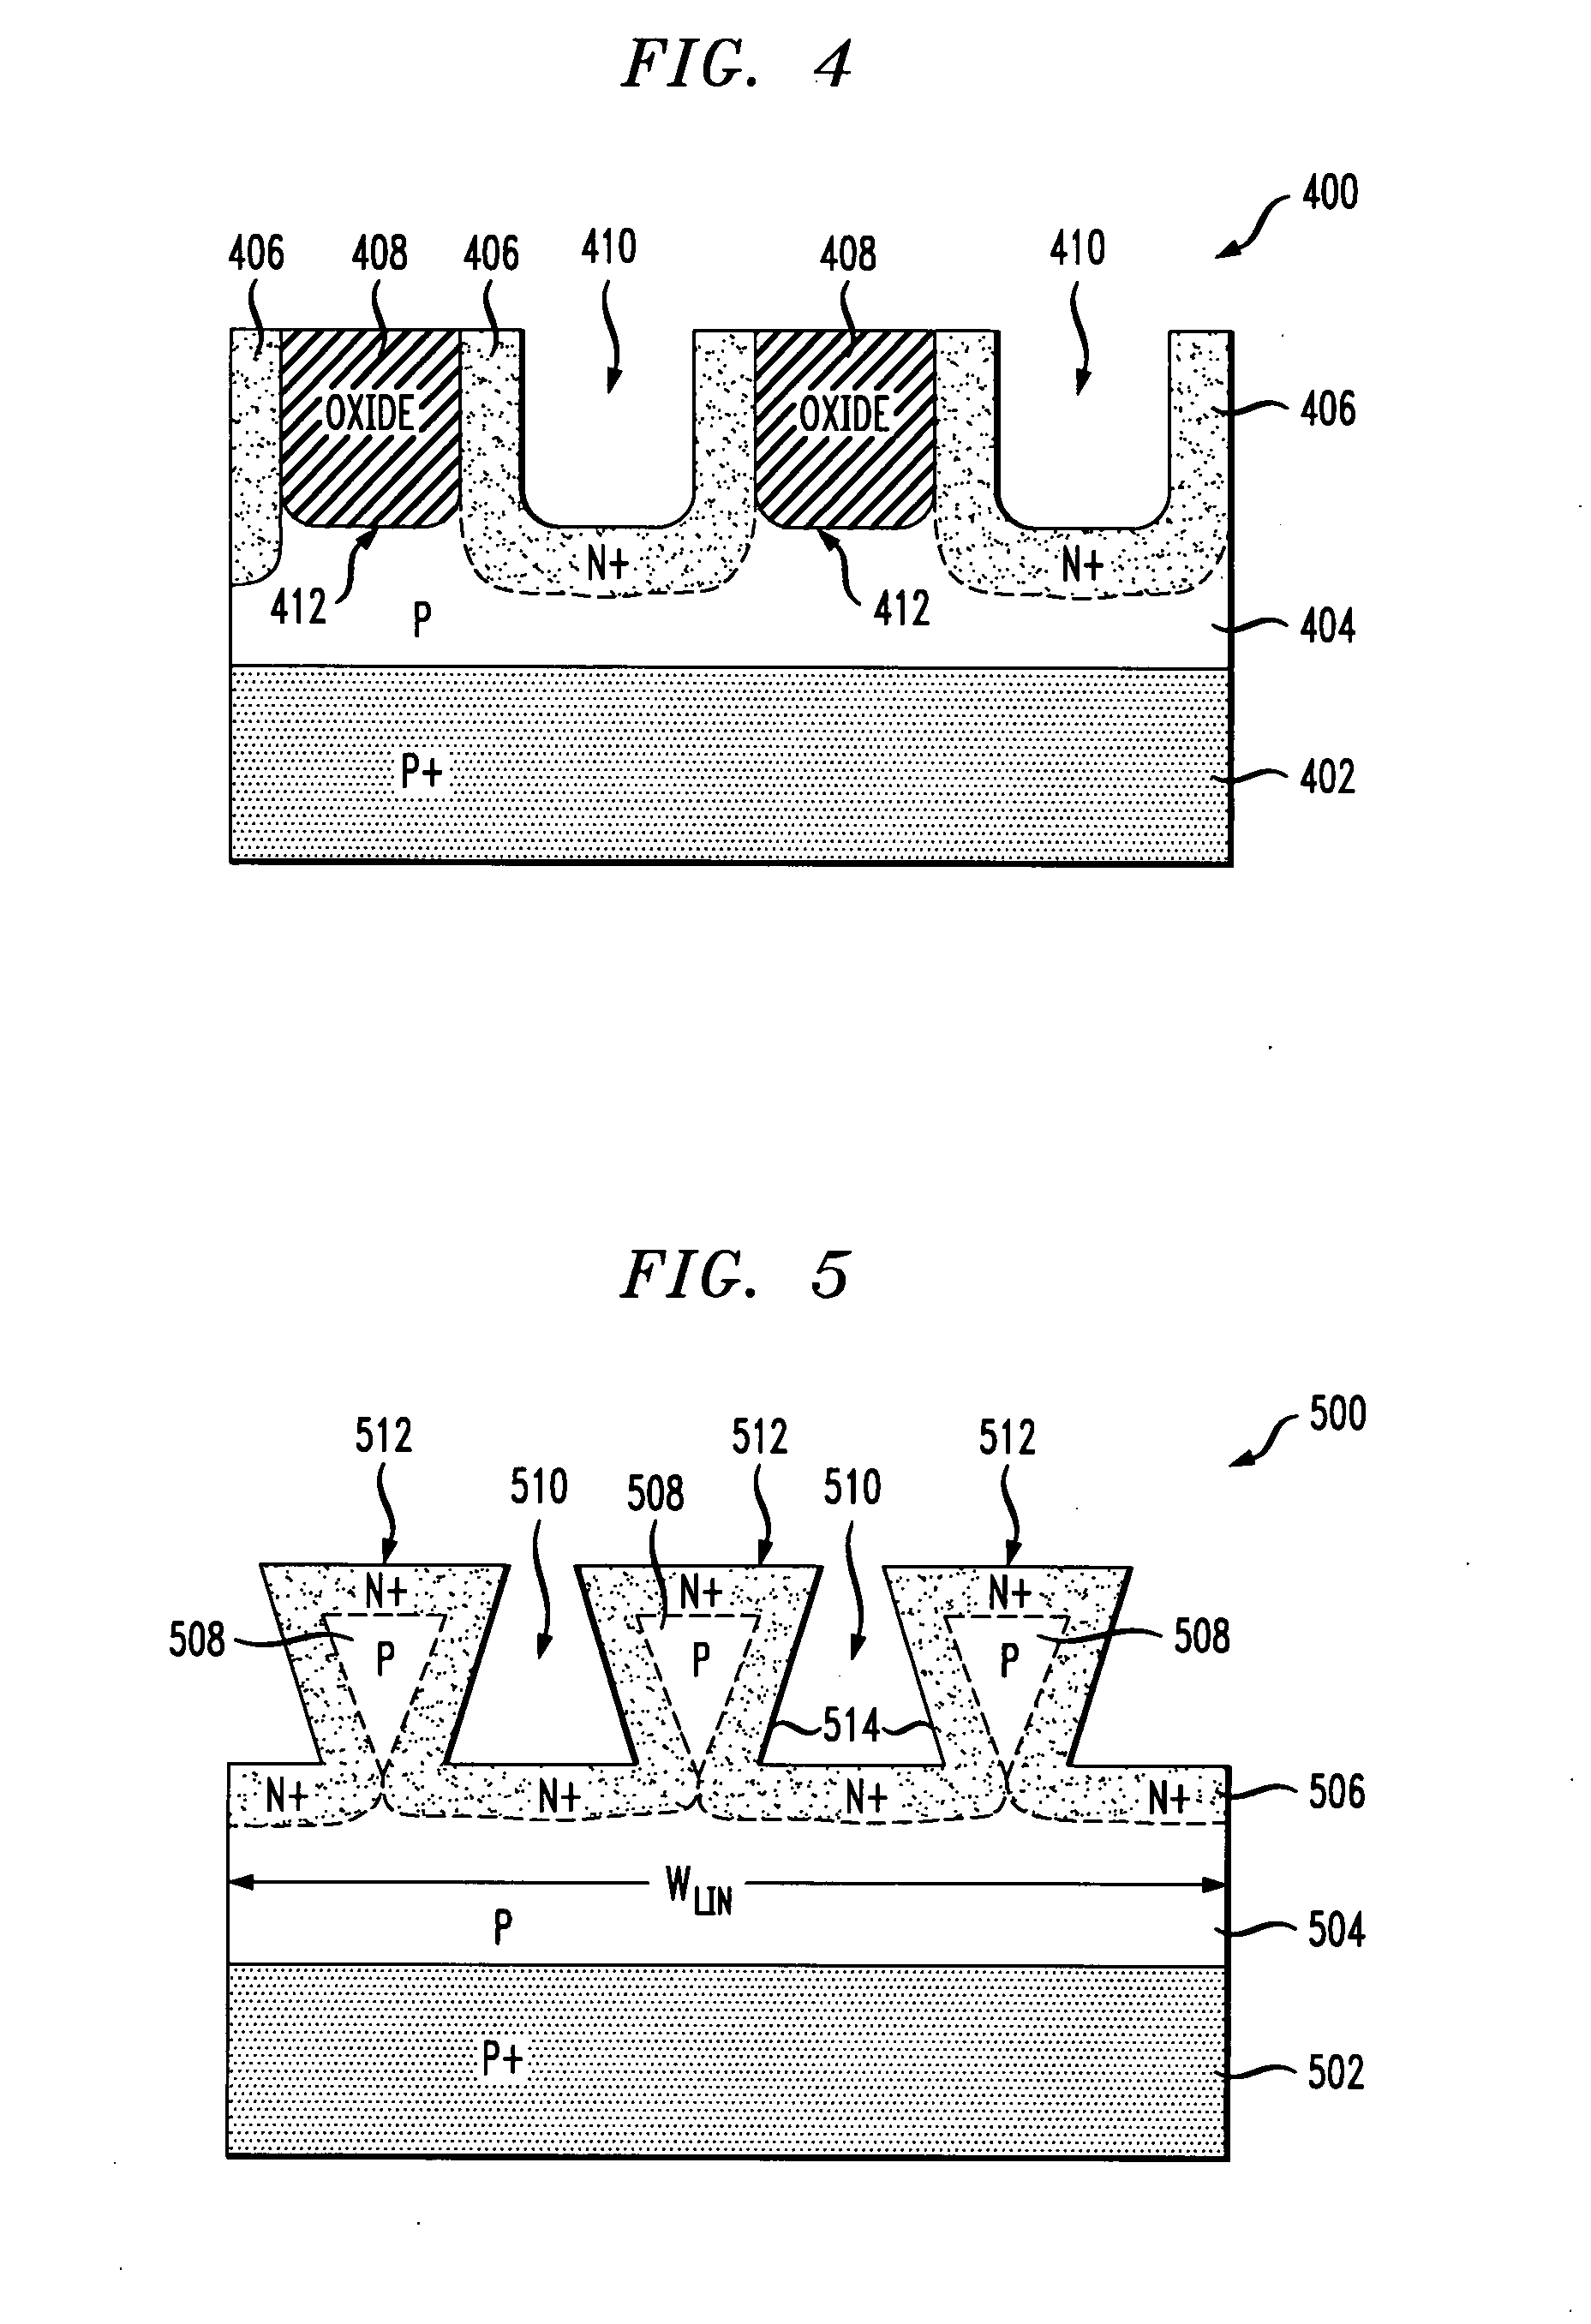 Metal-oxide-semiconductor device having trenched diffusion region and method of forming same